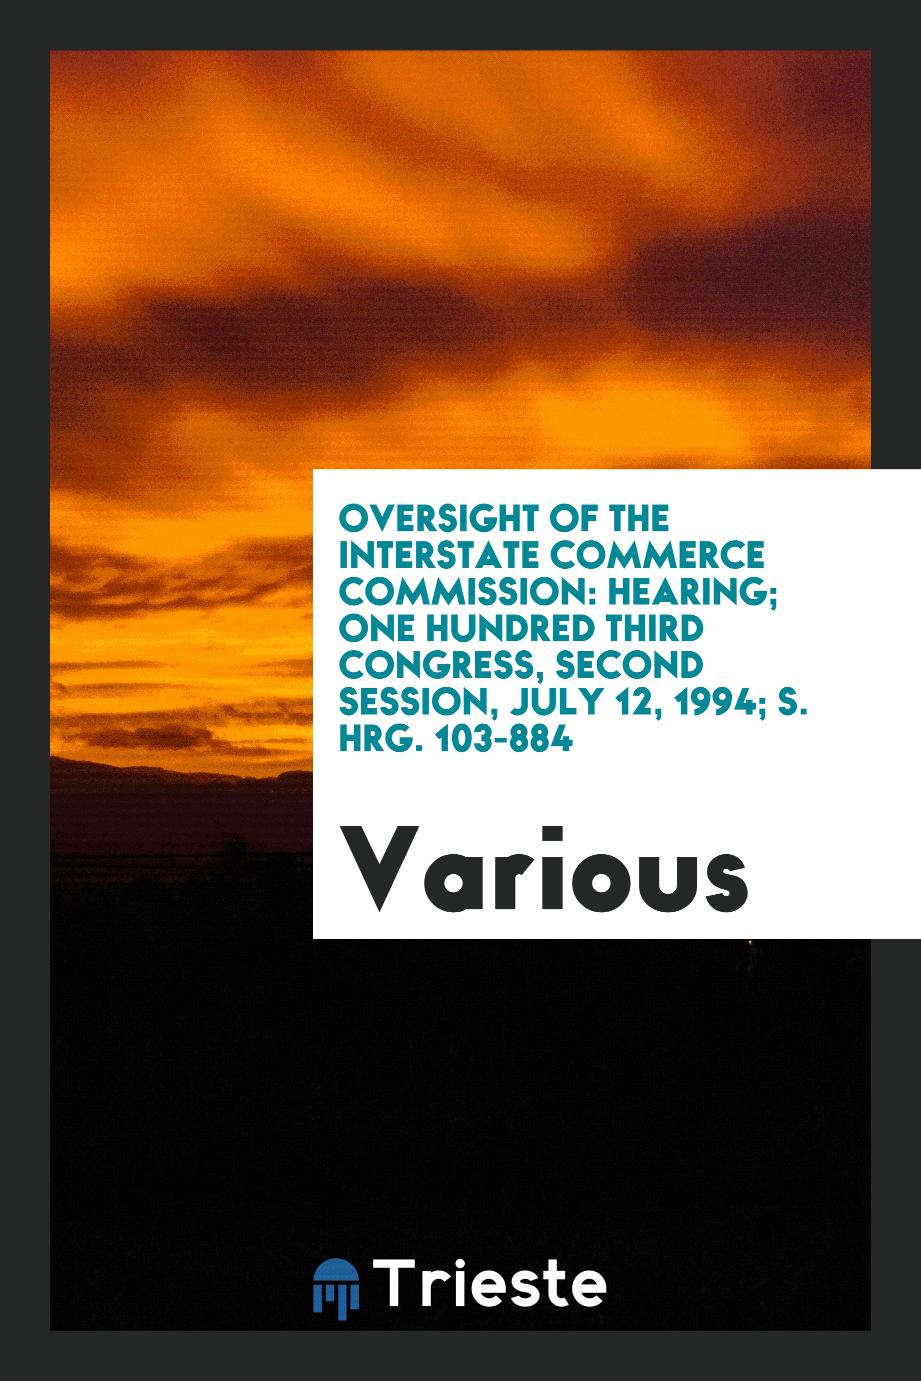 Oversight of the Interstate Commerce Commission: hearing; One Hundred Third Congress, second session, July 12, 1994; S. Hrg. 103-884